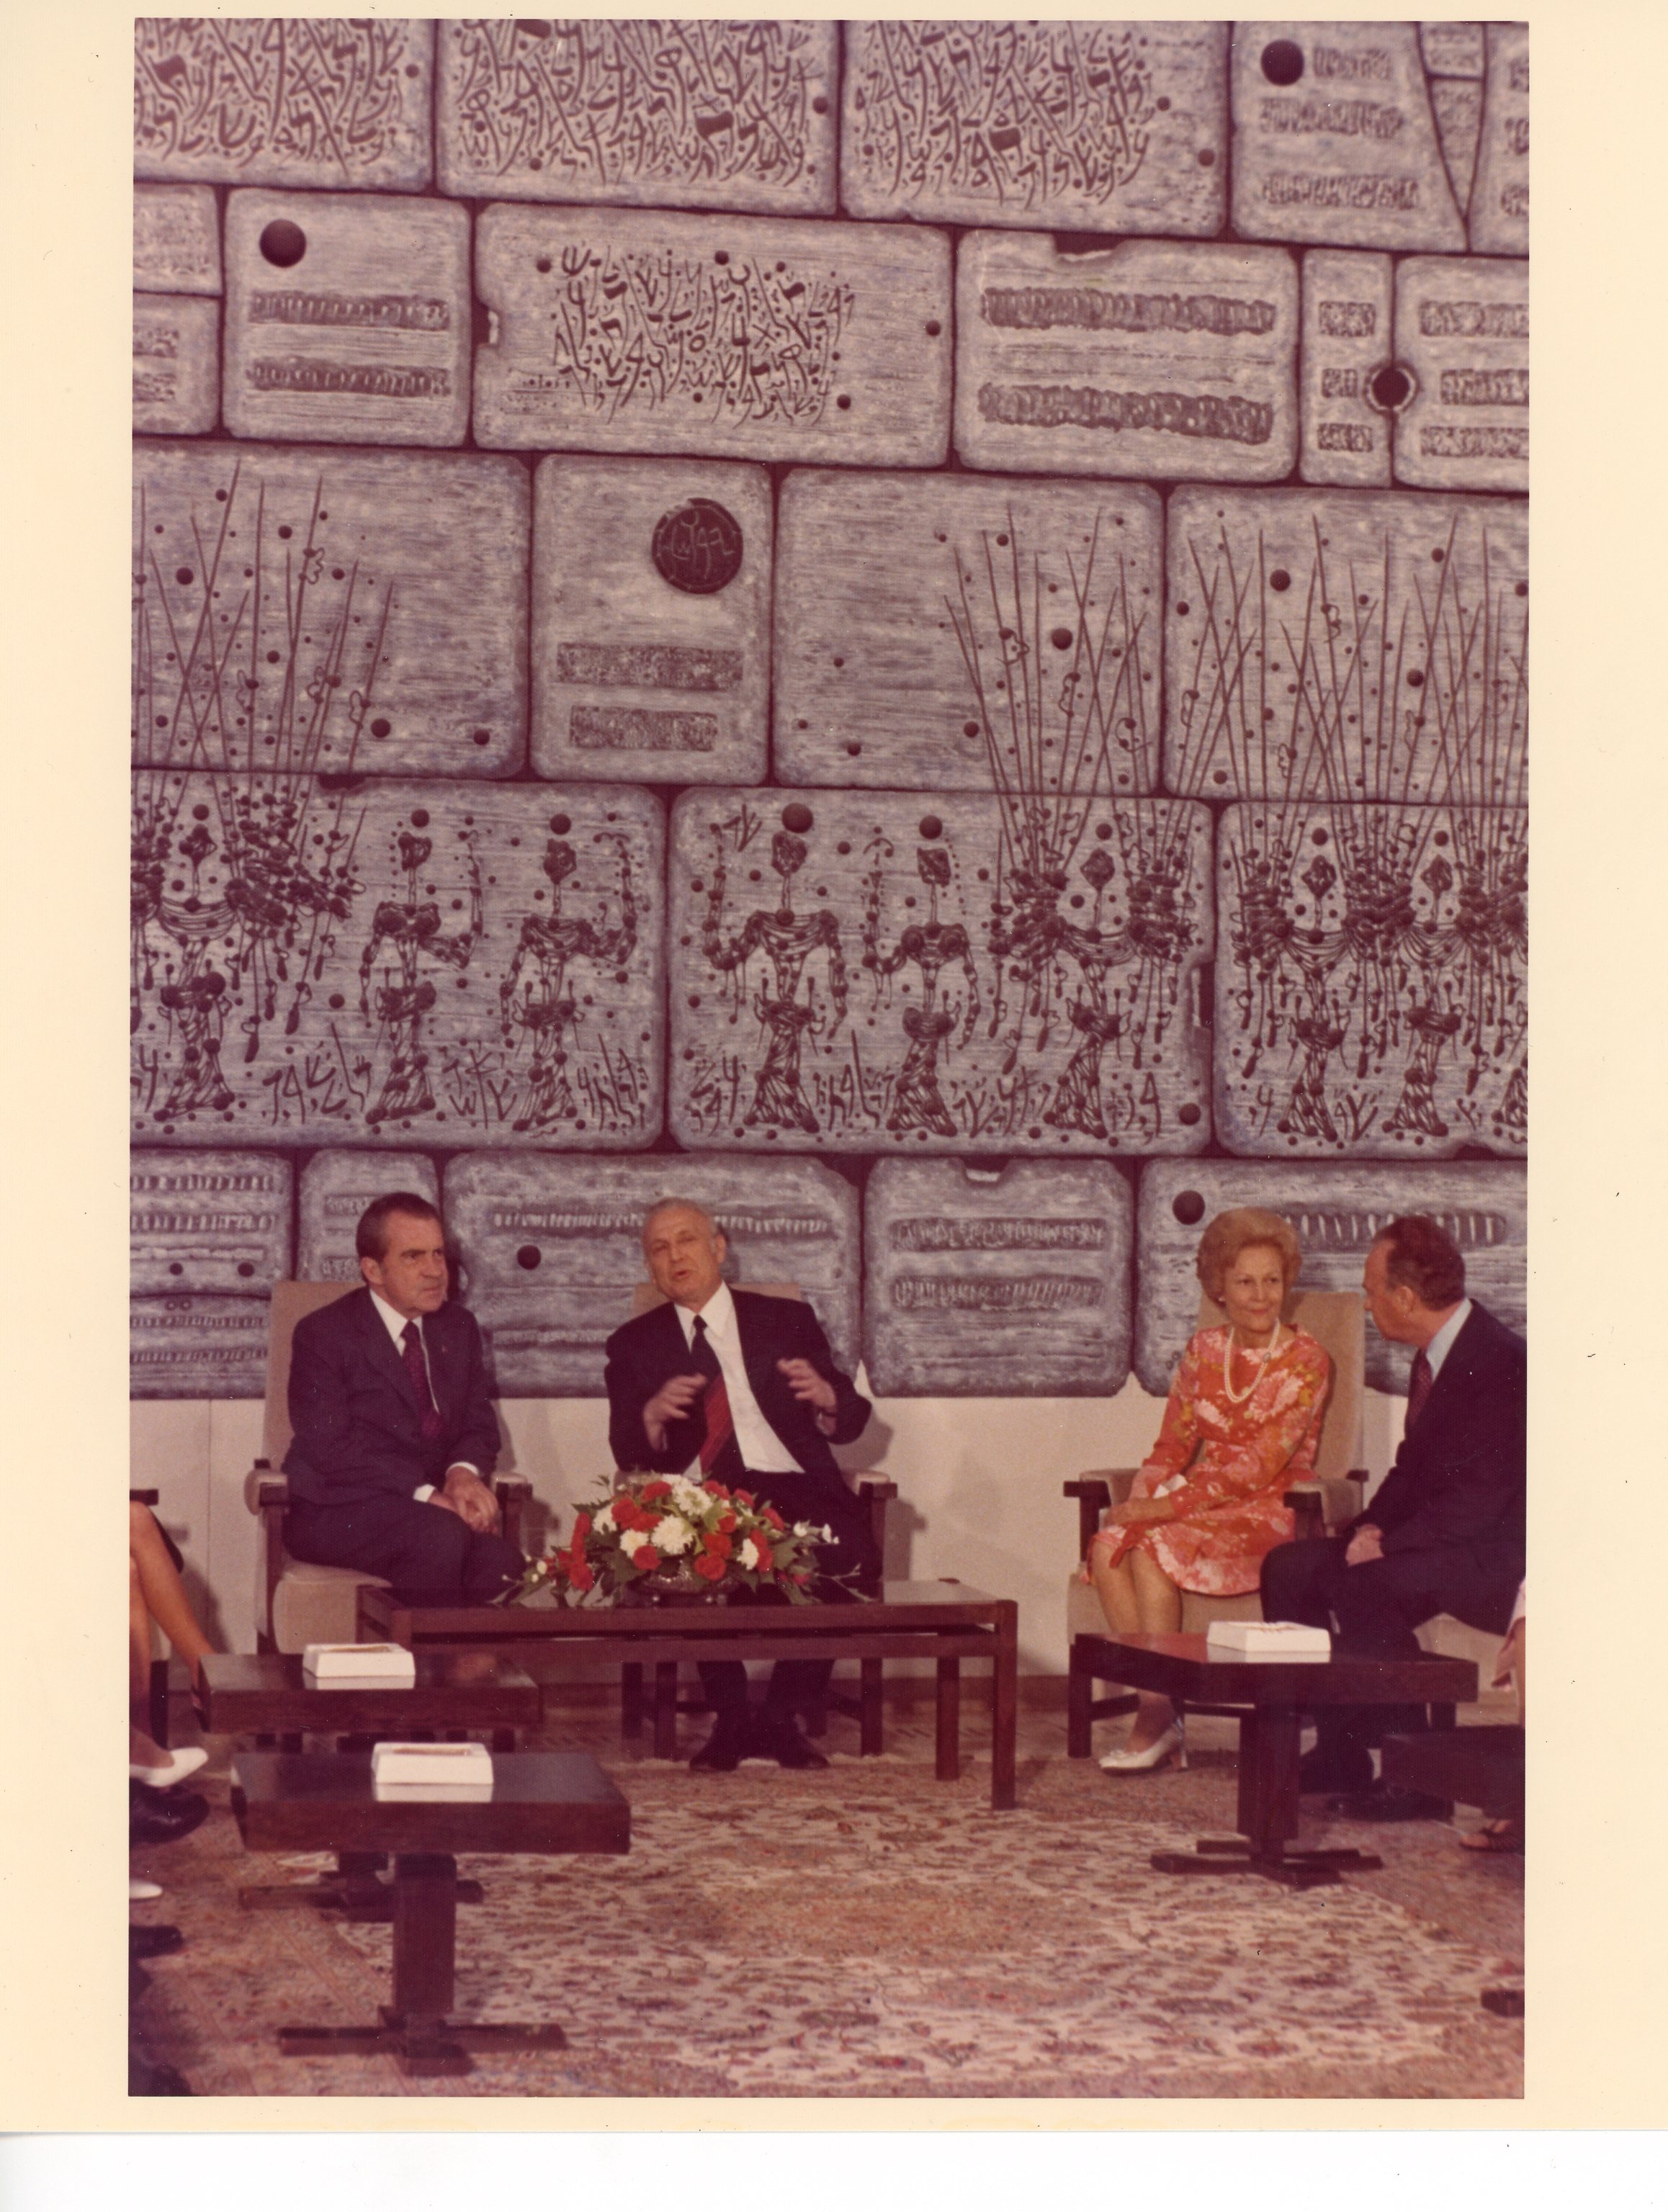 Middle East 1973: Setting the Stage for Diplomacy